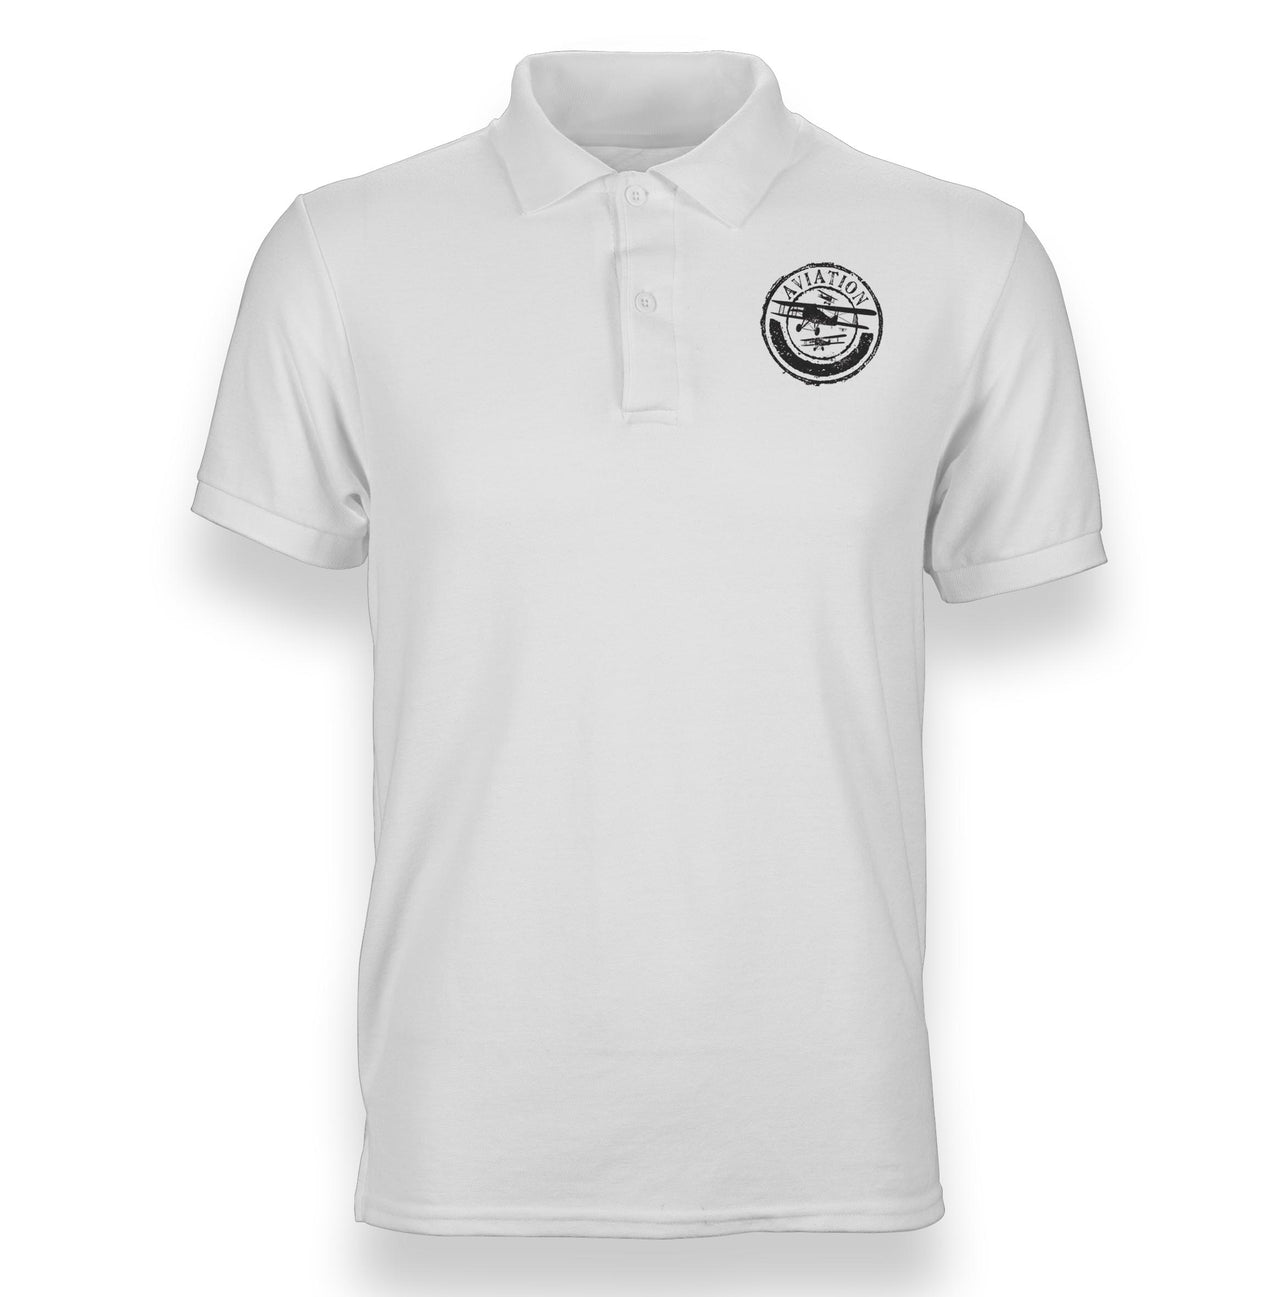 Aviation Lovers Designed Polo T-Shirts